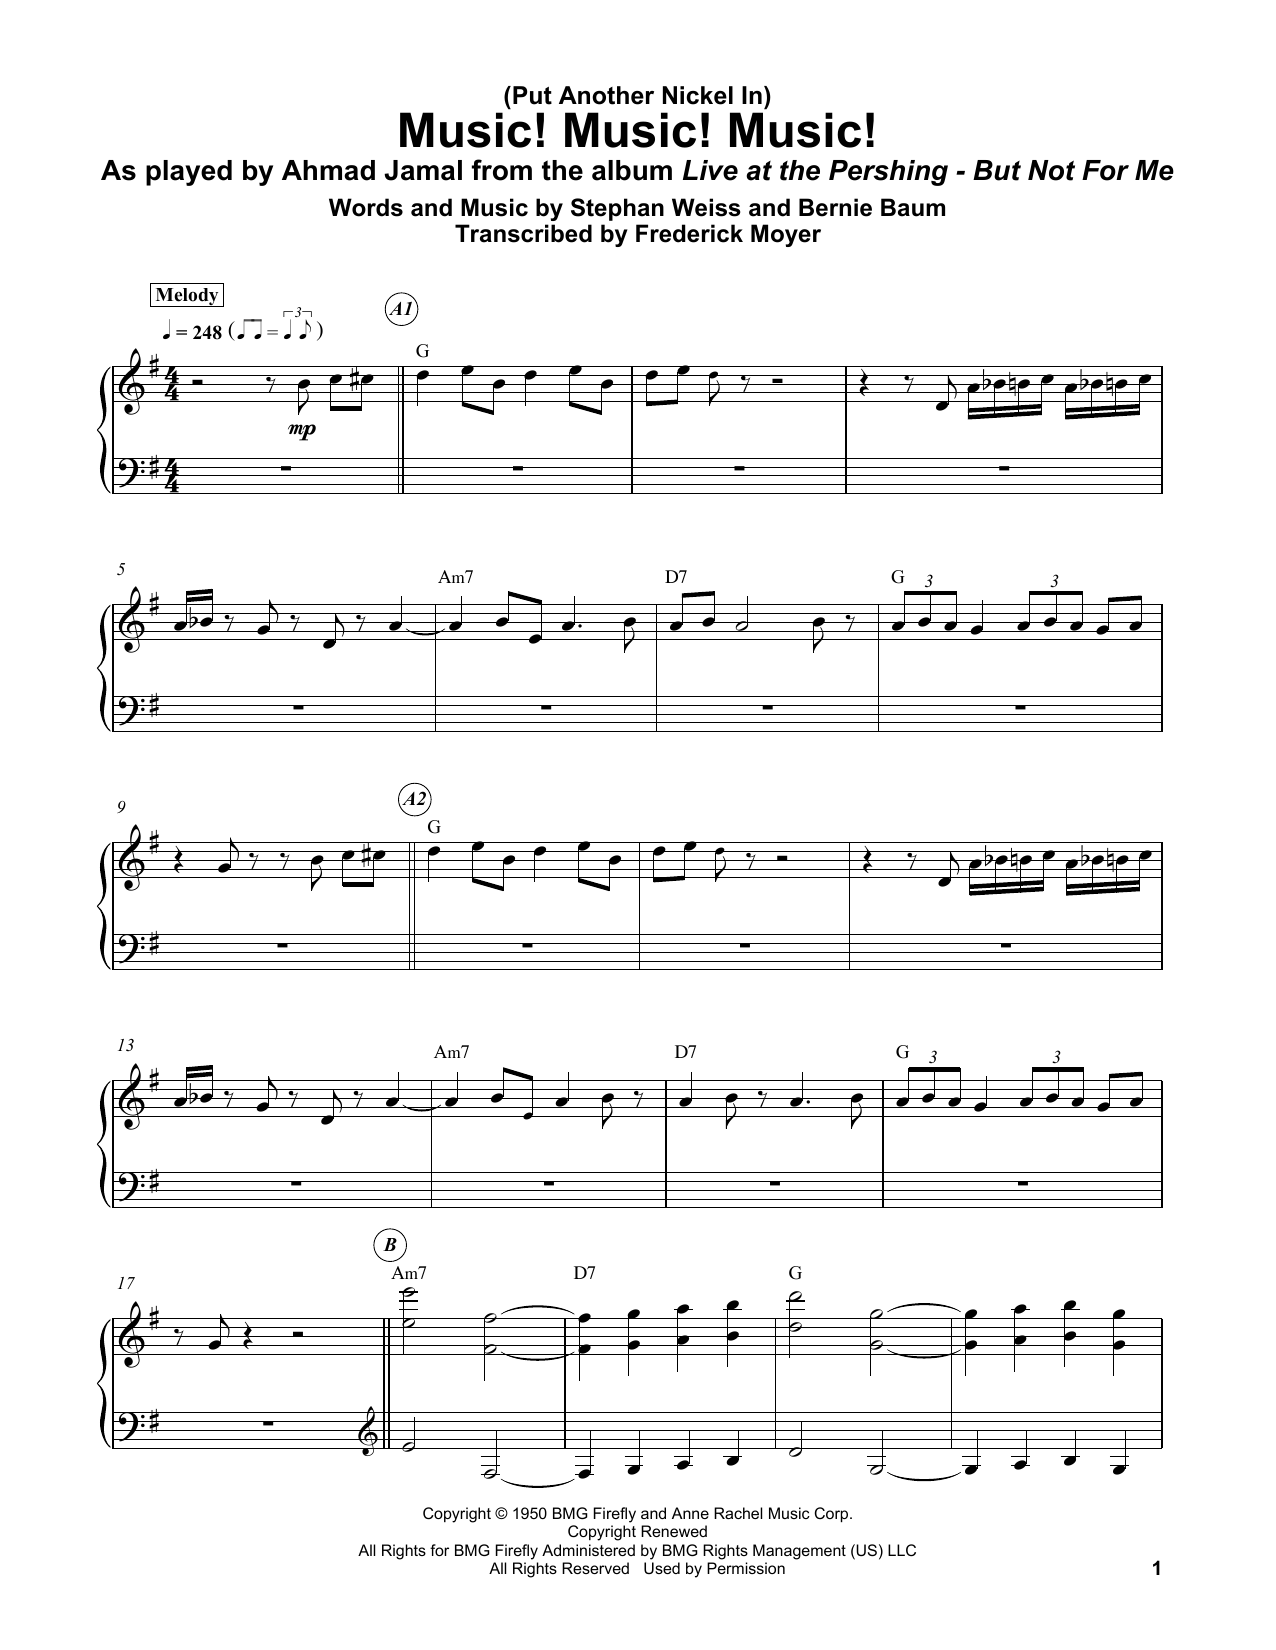 Bernie Baum (Put Another Nickel In) Music! Music! Music! sheet music notes and chords. Download Printable PDF.